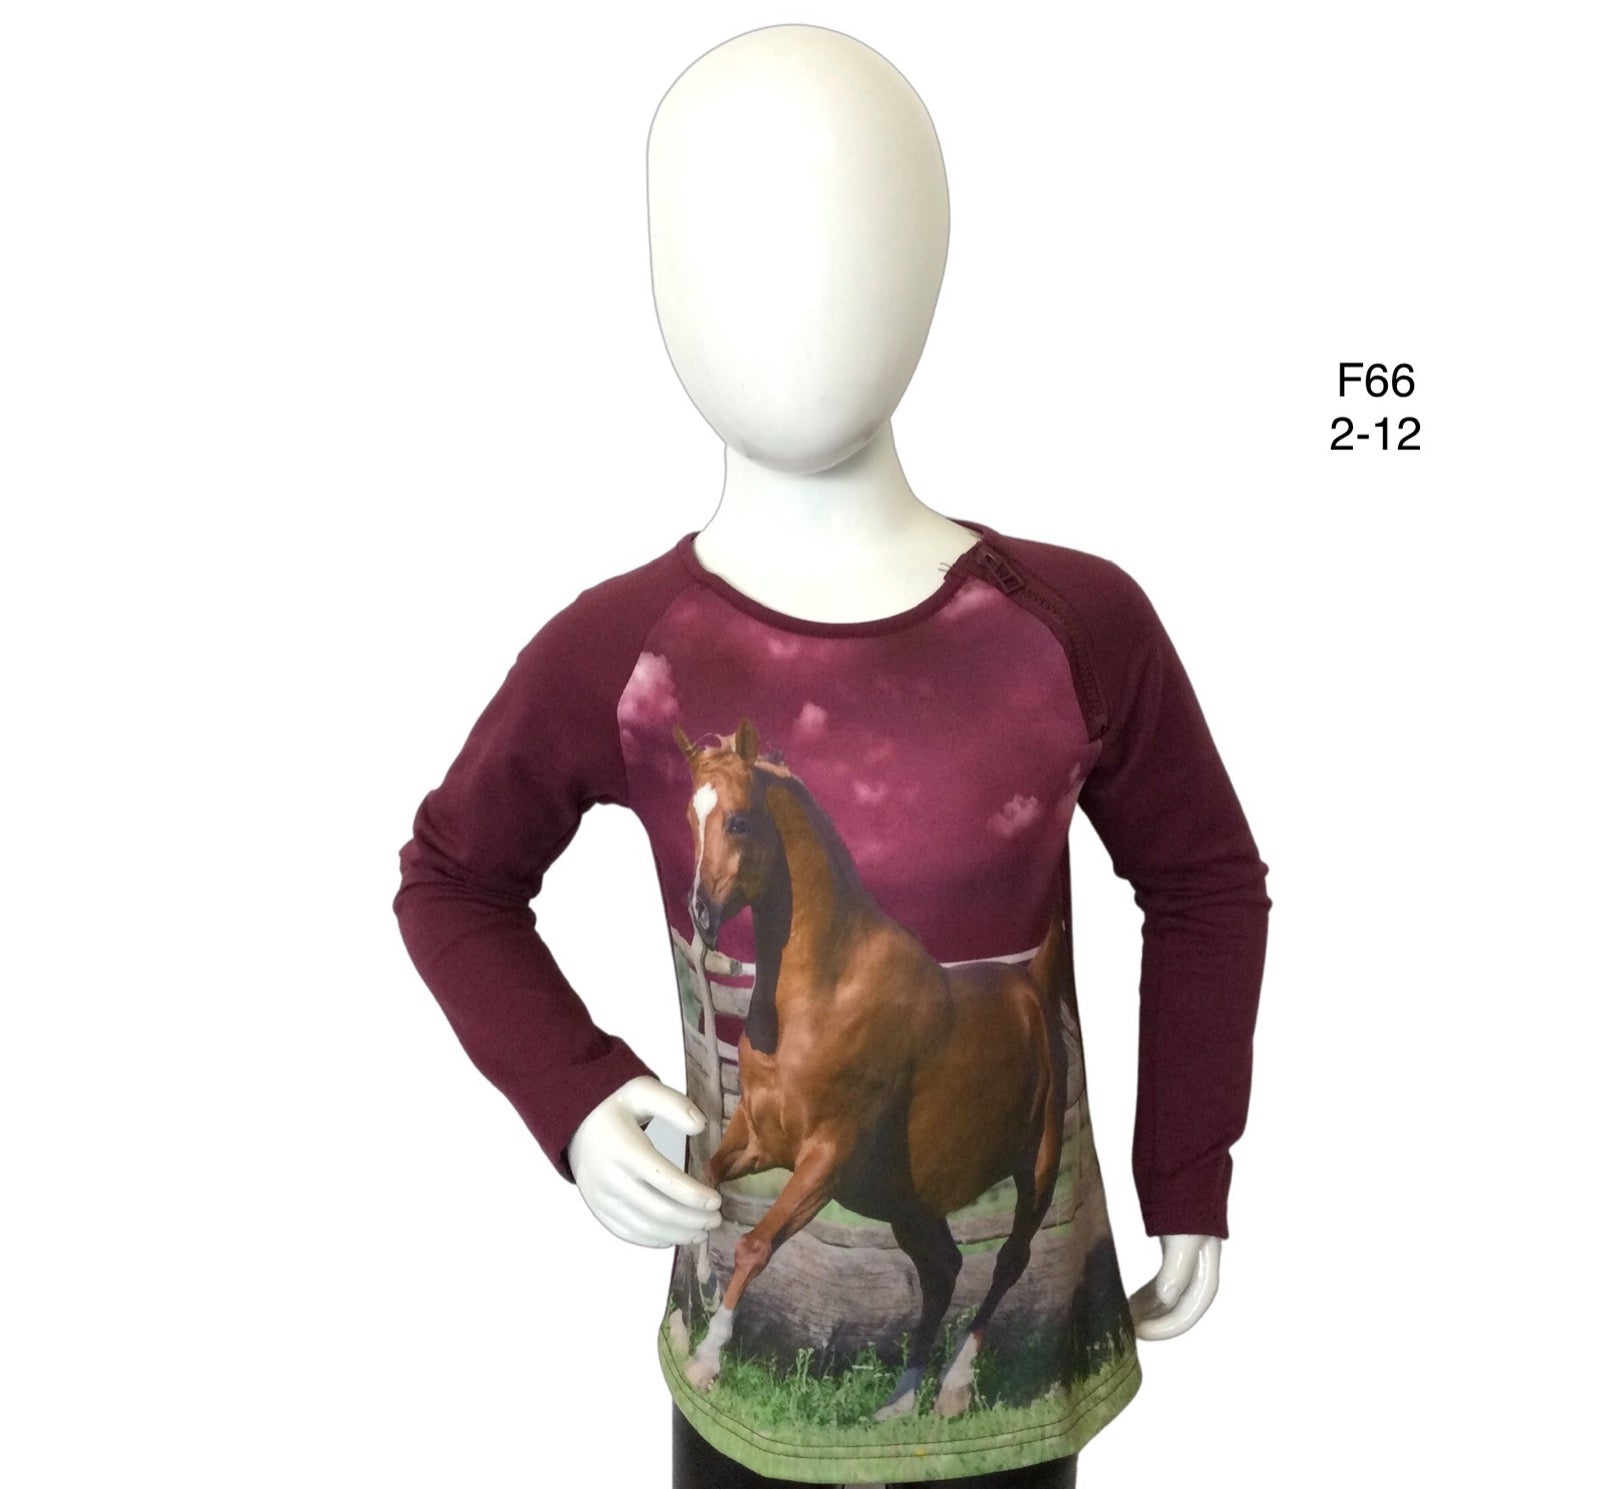 Longsleeve eggplant with horse with zipper